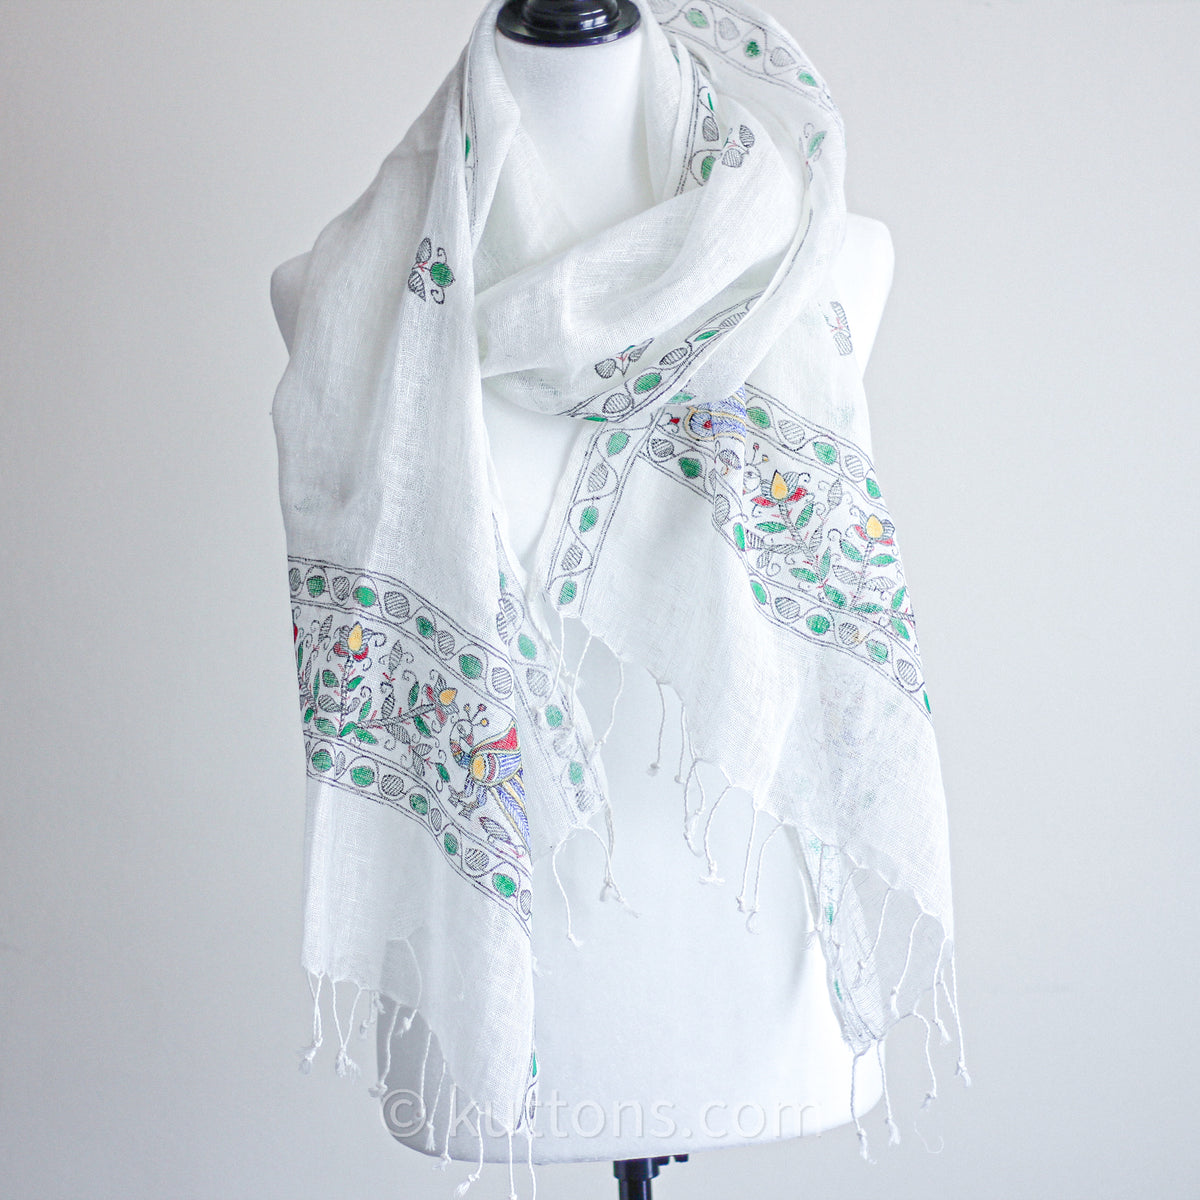 Hand-Painted Linen Wrap with Tassels - Tribal Madhubani Motifs | White, Green Leaves, 20x80"